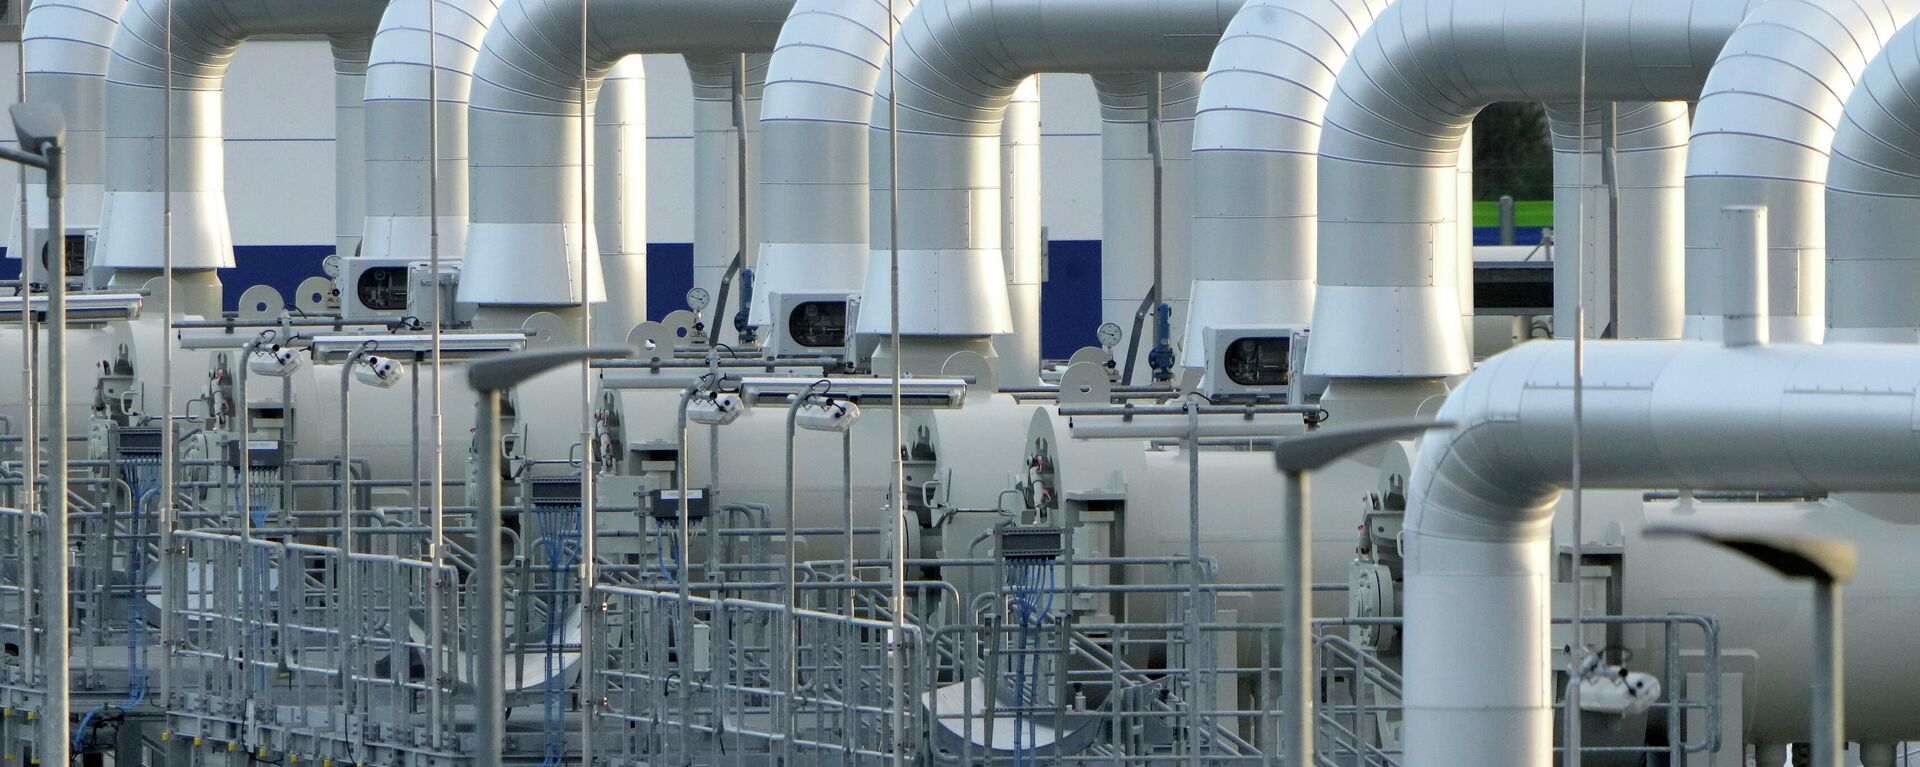 FILE - Pipes at the landfall facilities of the 'Nord Stream 2' gas pipline are pictured in Lubmin, northern Germany, Tuesday, Feb. 15, 2022 - Sputnik International, 1920, 04.07.2022